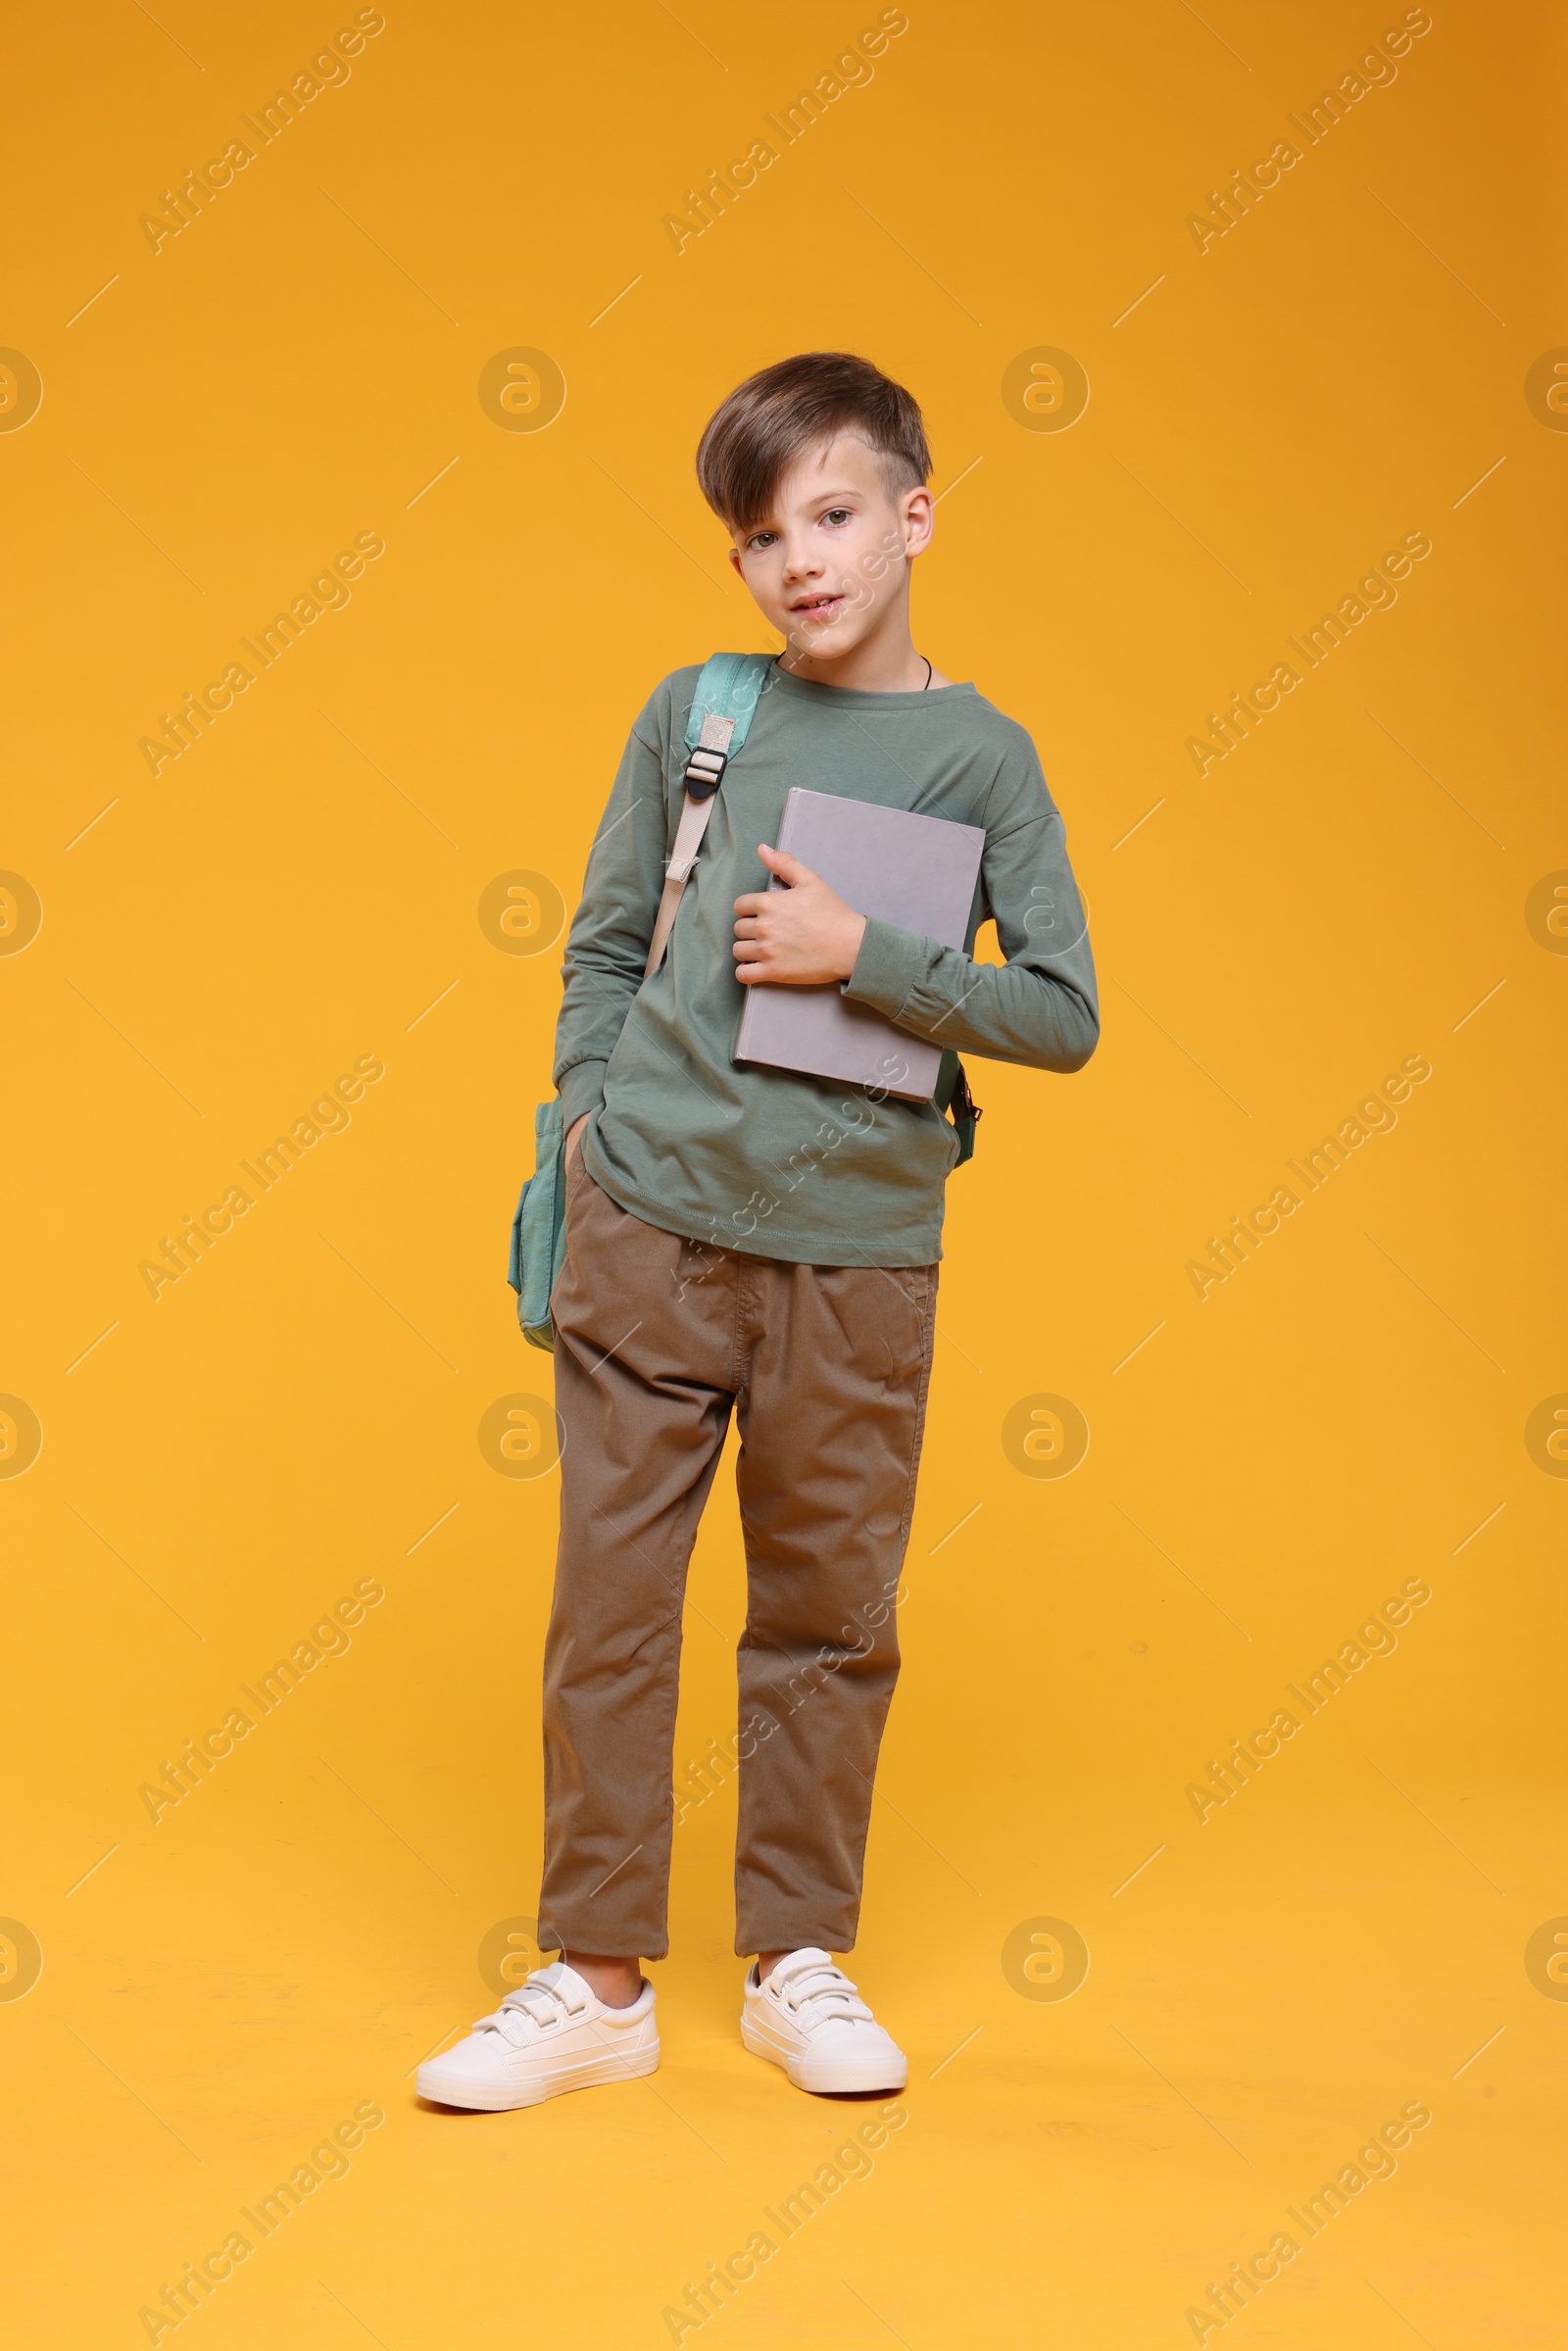 Photo of Cute schoolboy with book on orange background